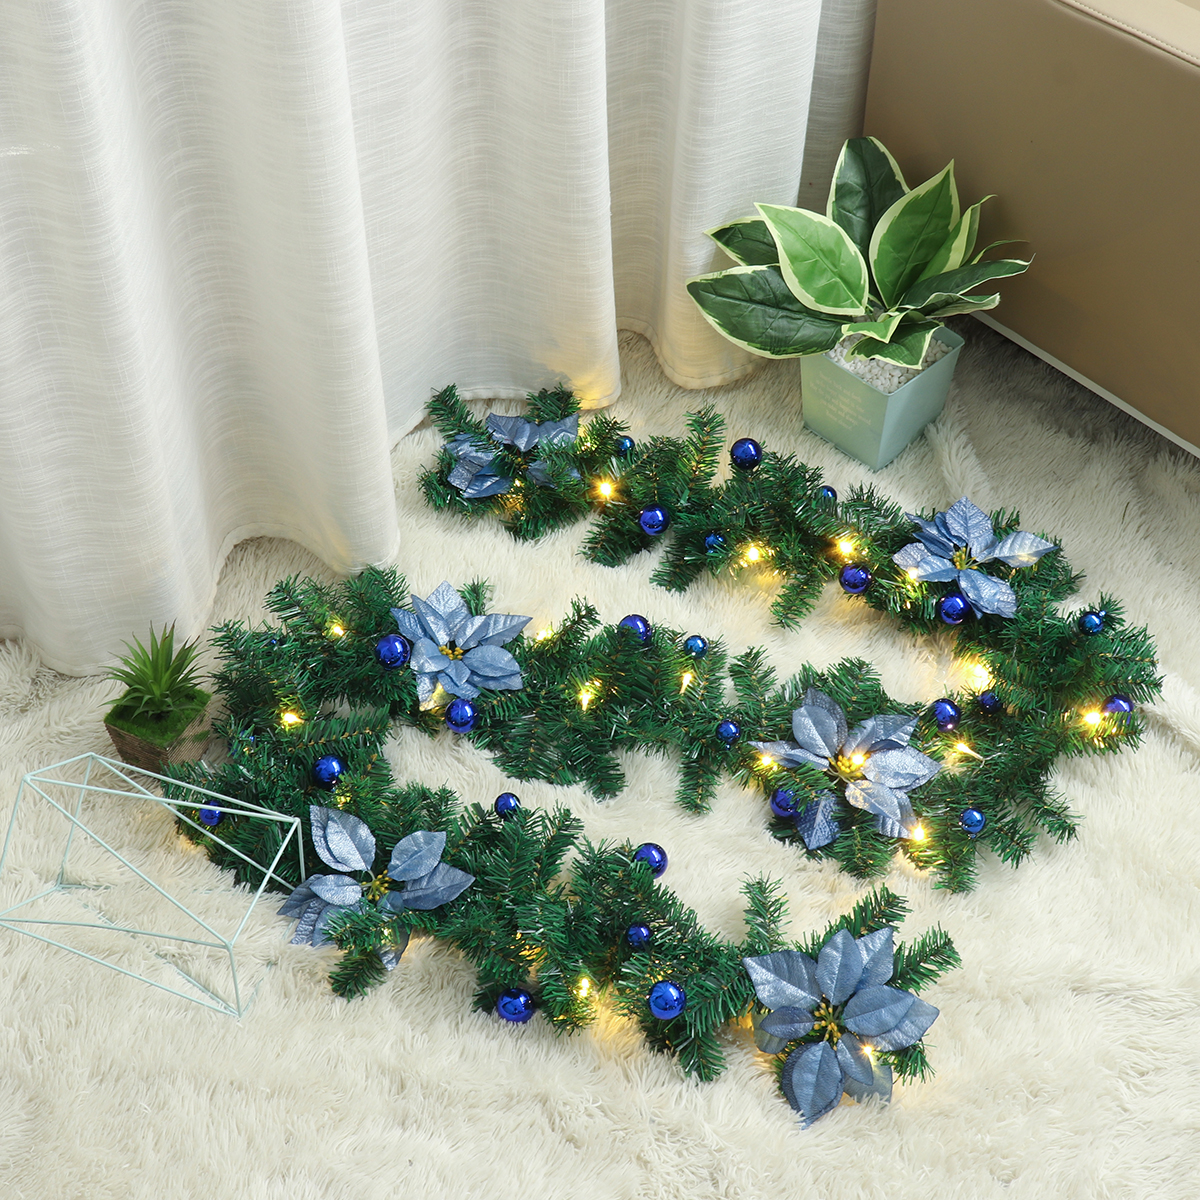 27m-Christmas-Garland-Colorful-Fireplaces-Stairs-LED-Decorated-Garlands-Decor-1821550-12